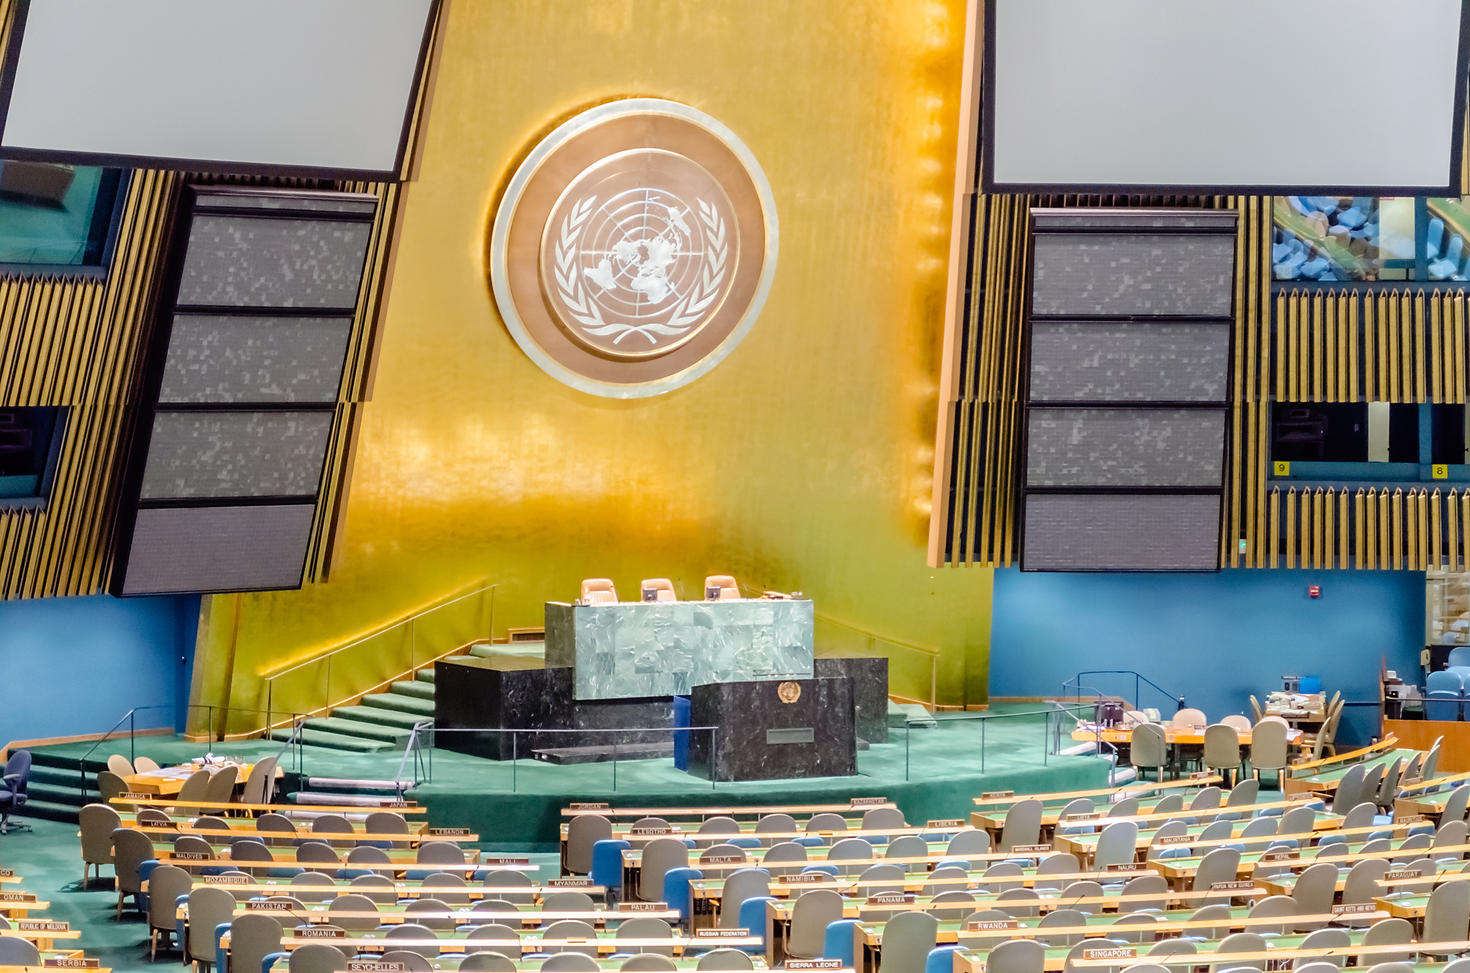 The Assembly Hall room of the UN.